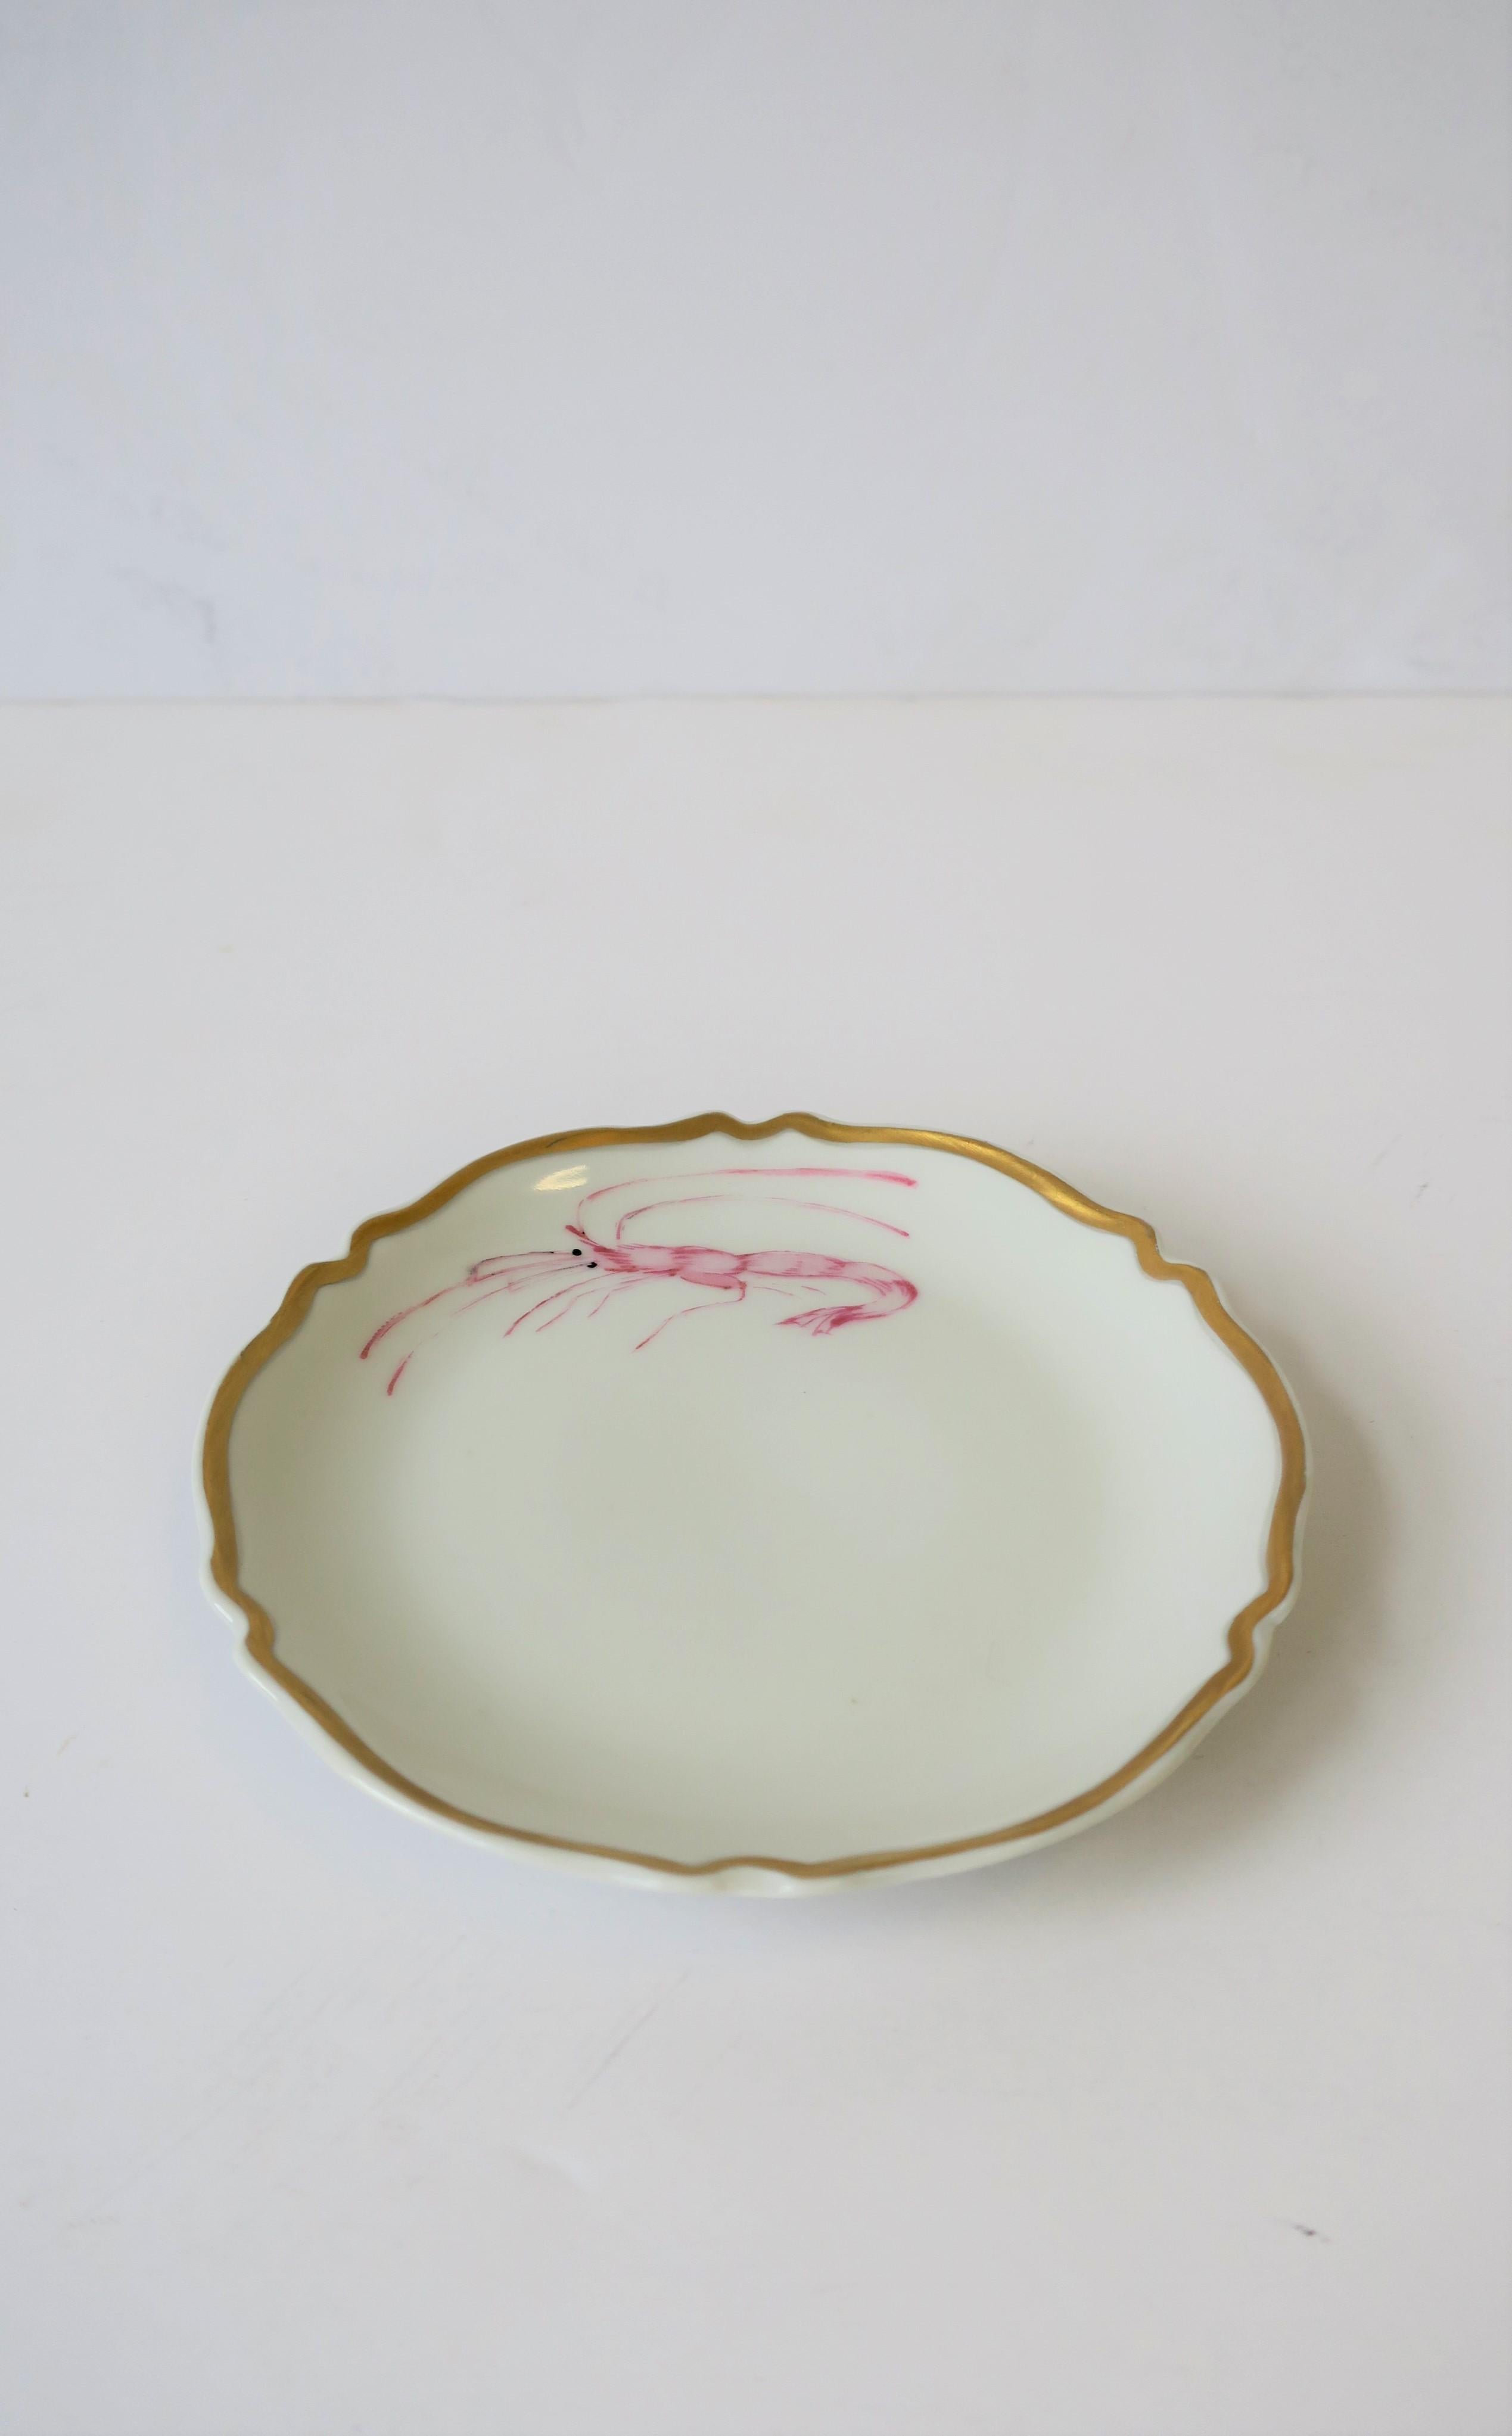 Hand-Painted French White and Gold Porcelain Jewelry Dish Signed by Designer